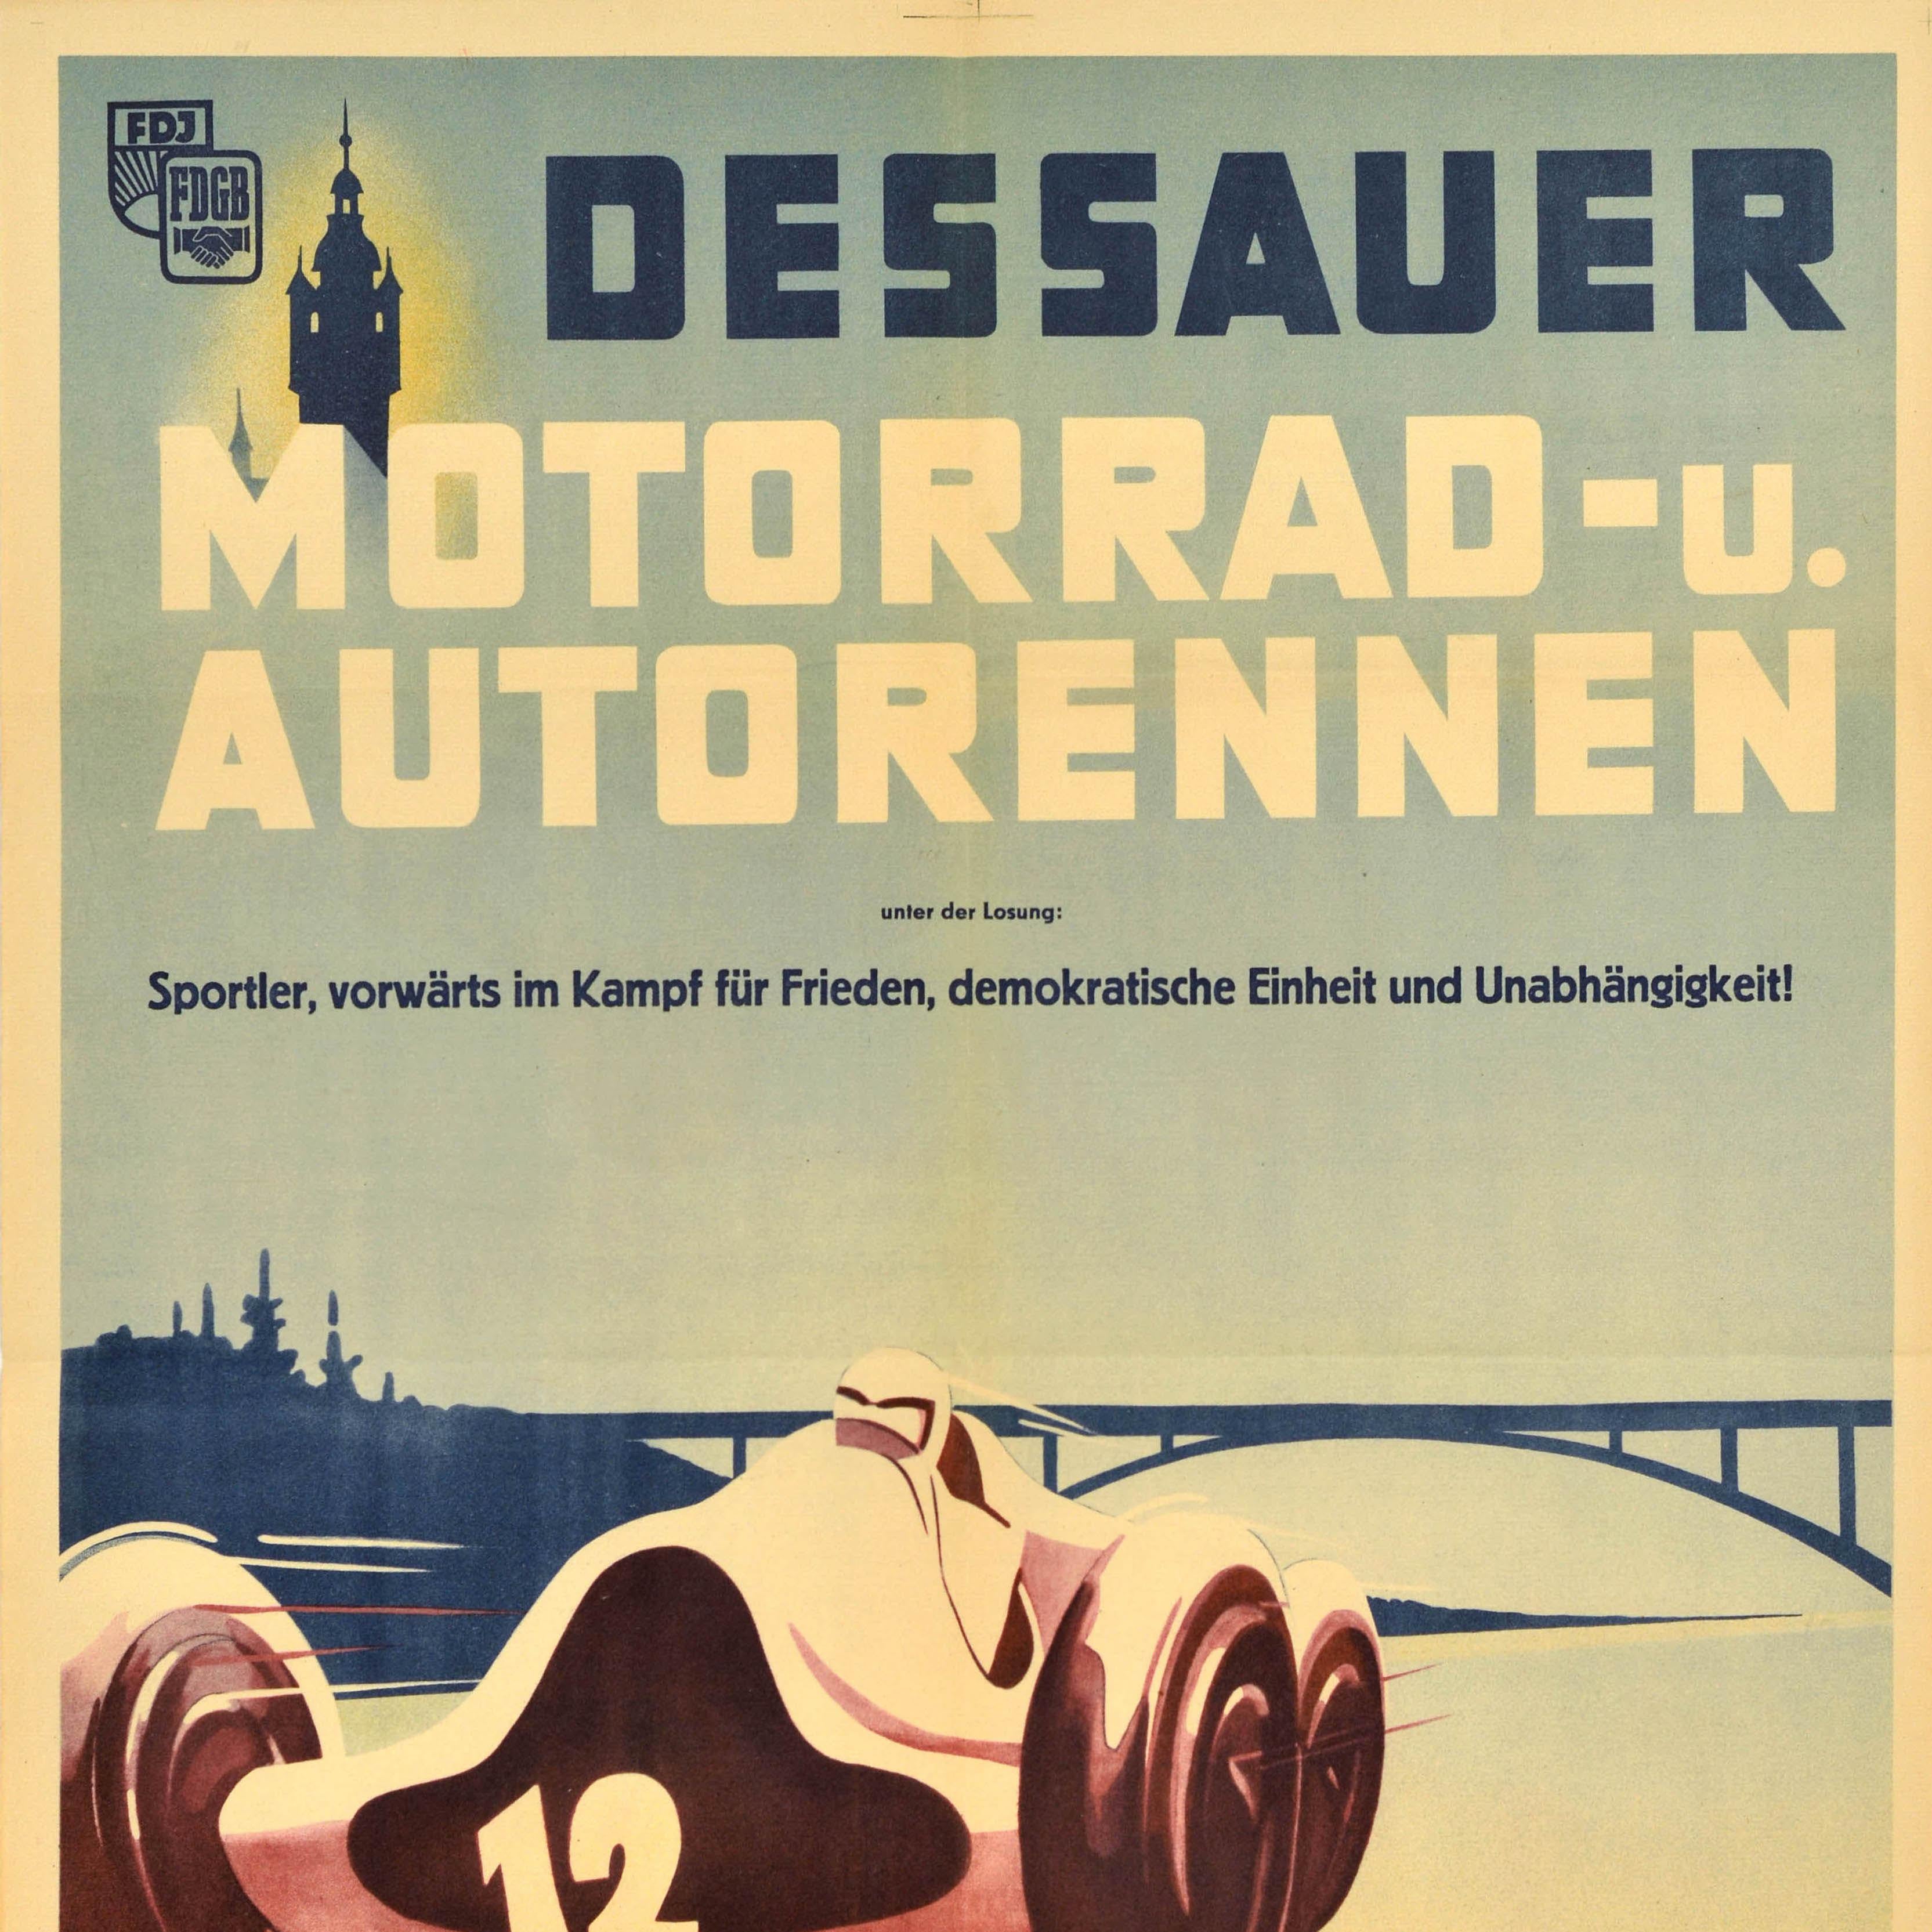 Original Vintage Motorsport Poster Dessau Motorcycle Car Race Germany Midcentury In Good Condition For Sale In London, GB